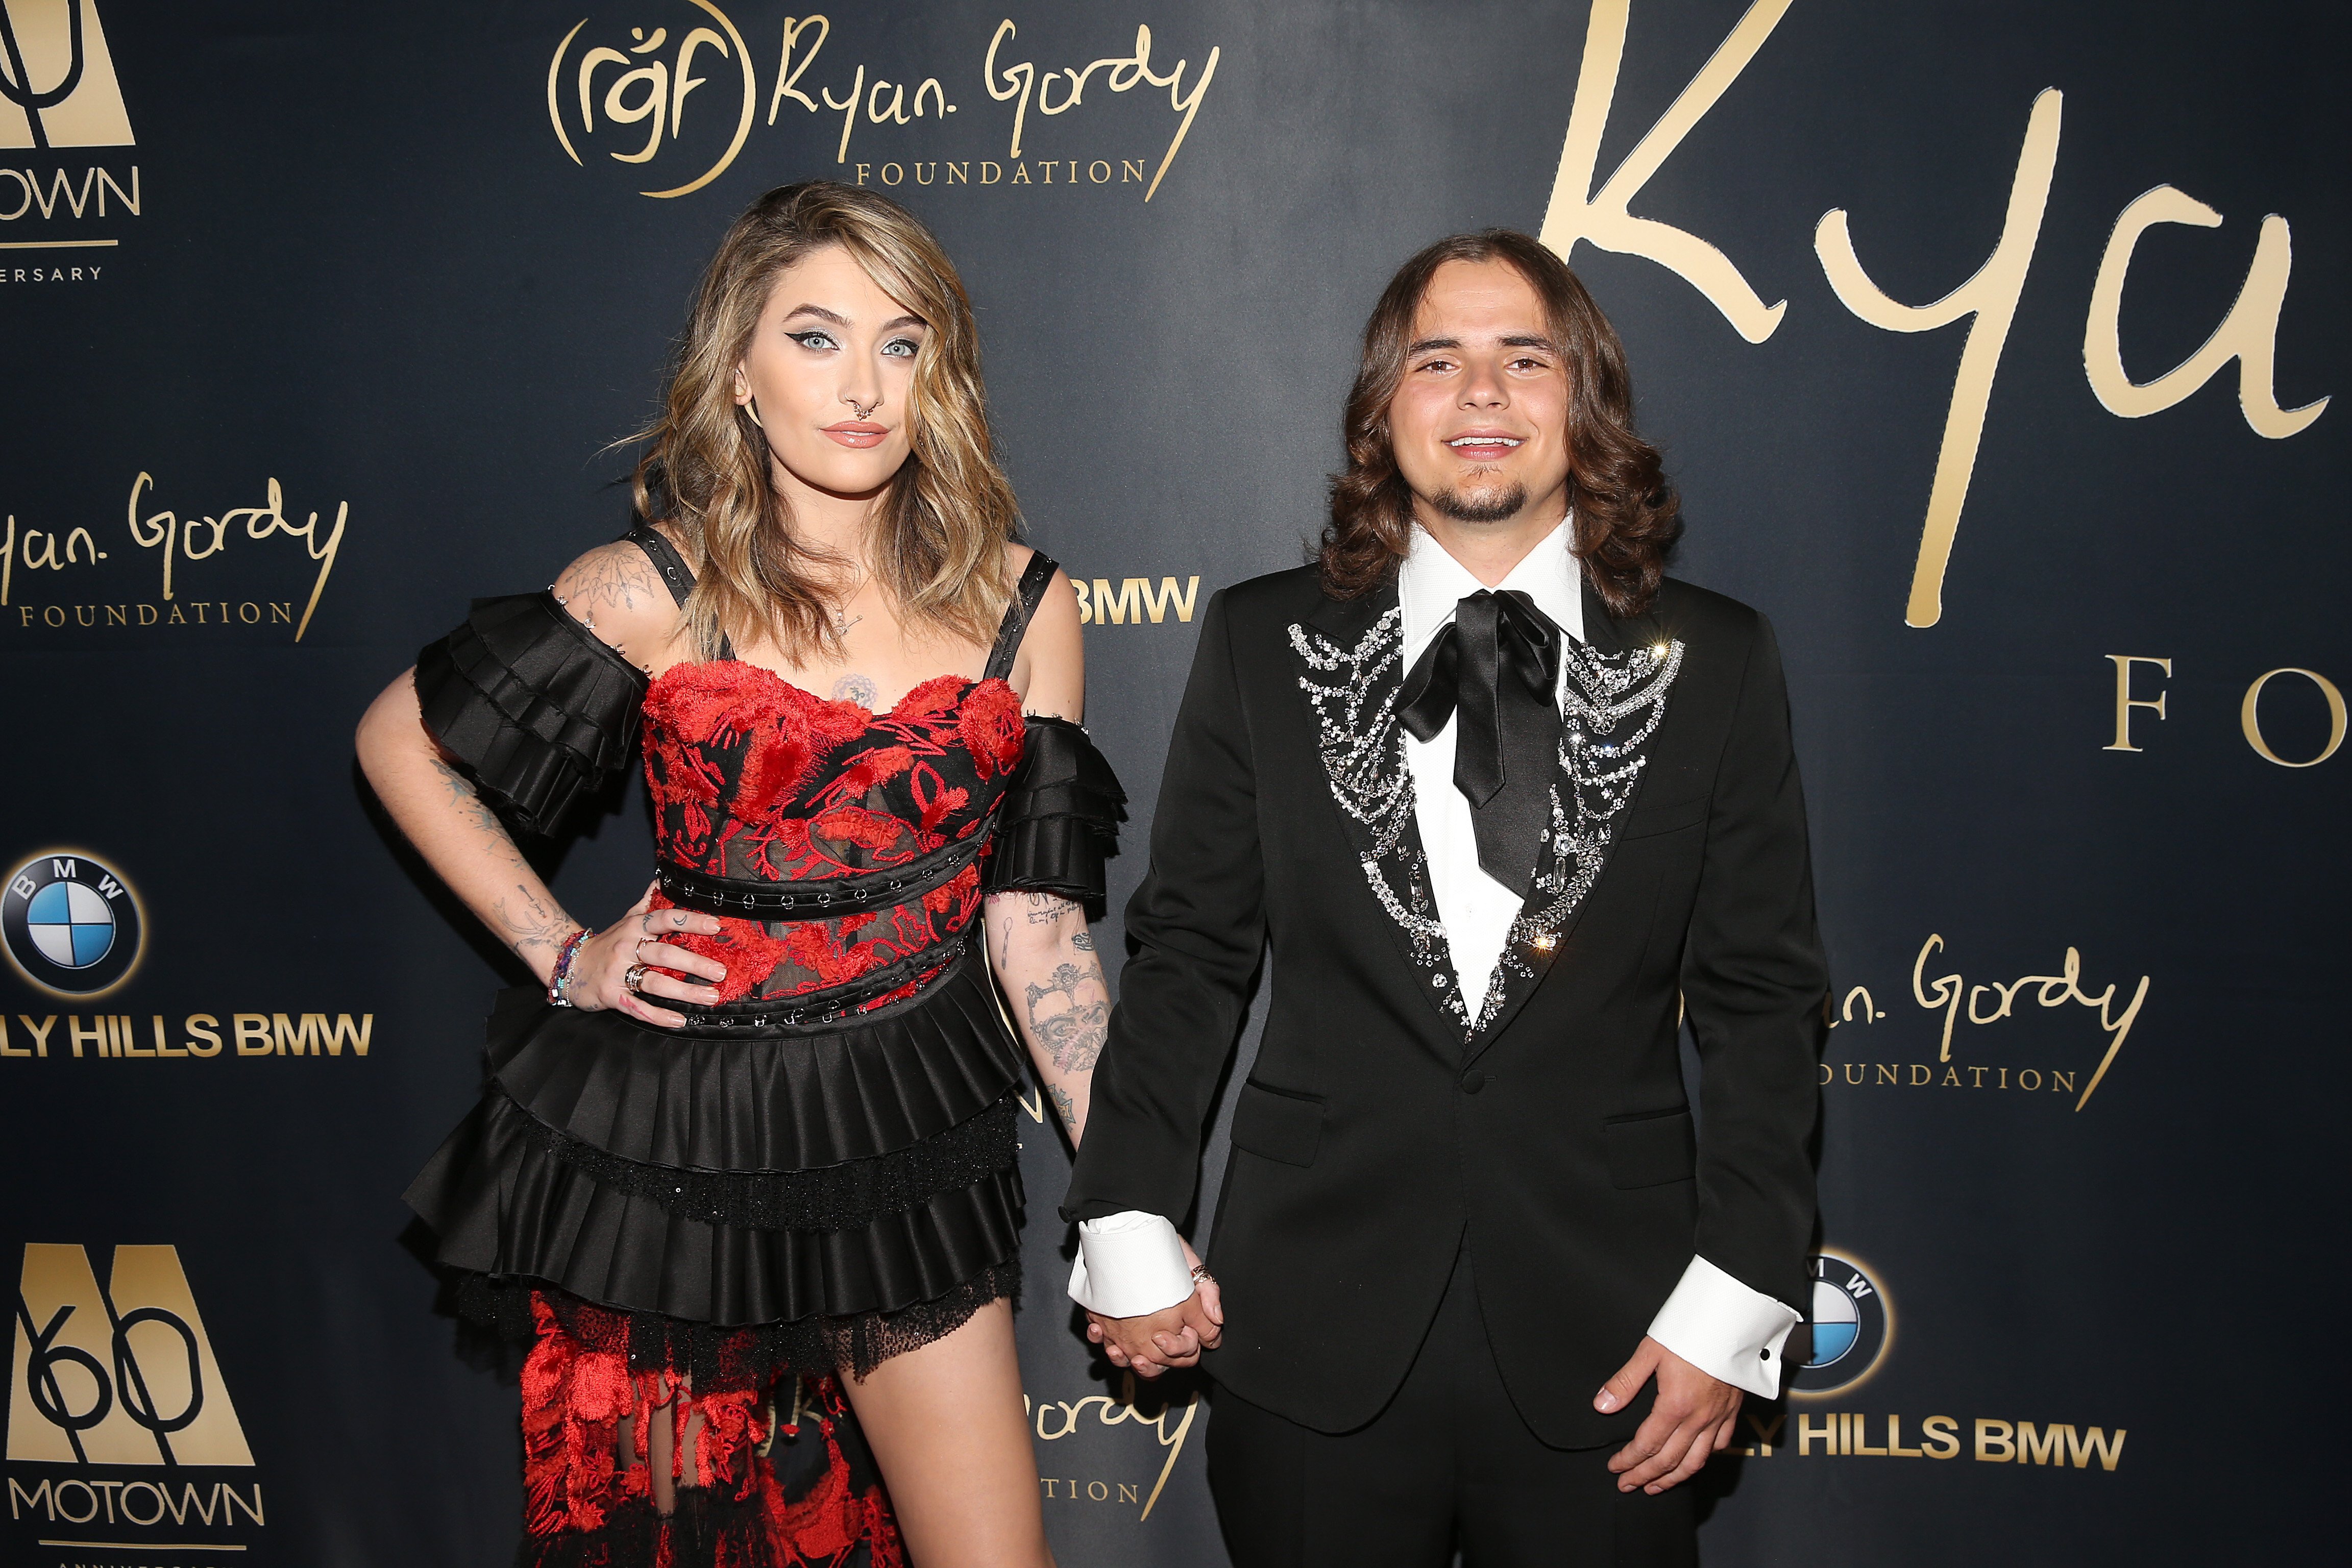 Paris Jackson and Prince Jackson at the Ryan Gordy Foundation's sixty years anniversary Gala | Photo: Getty Images